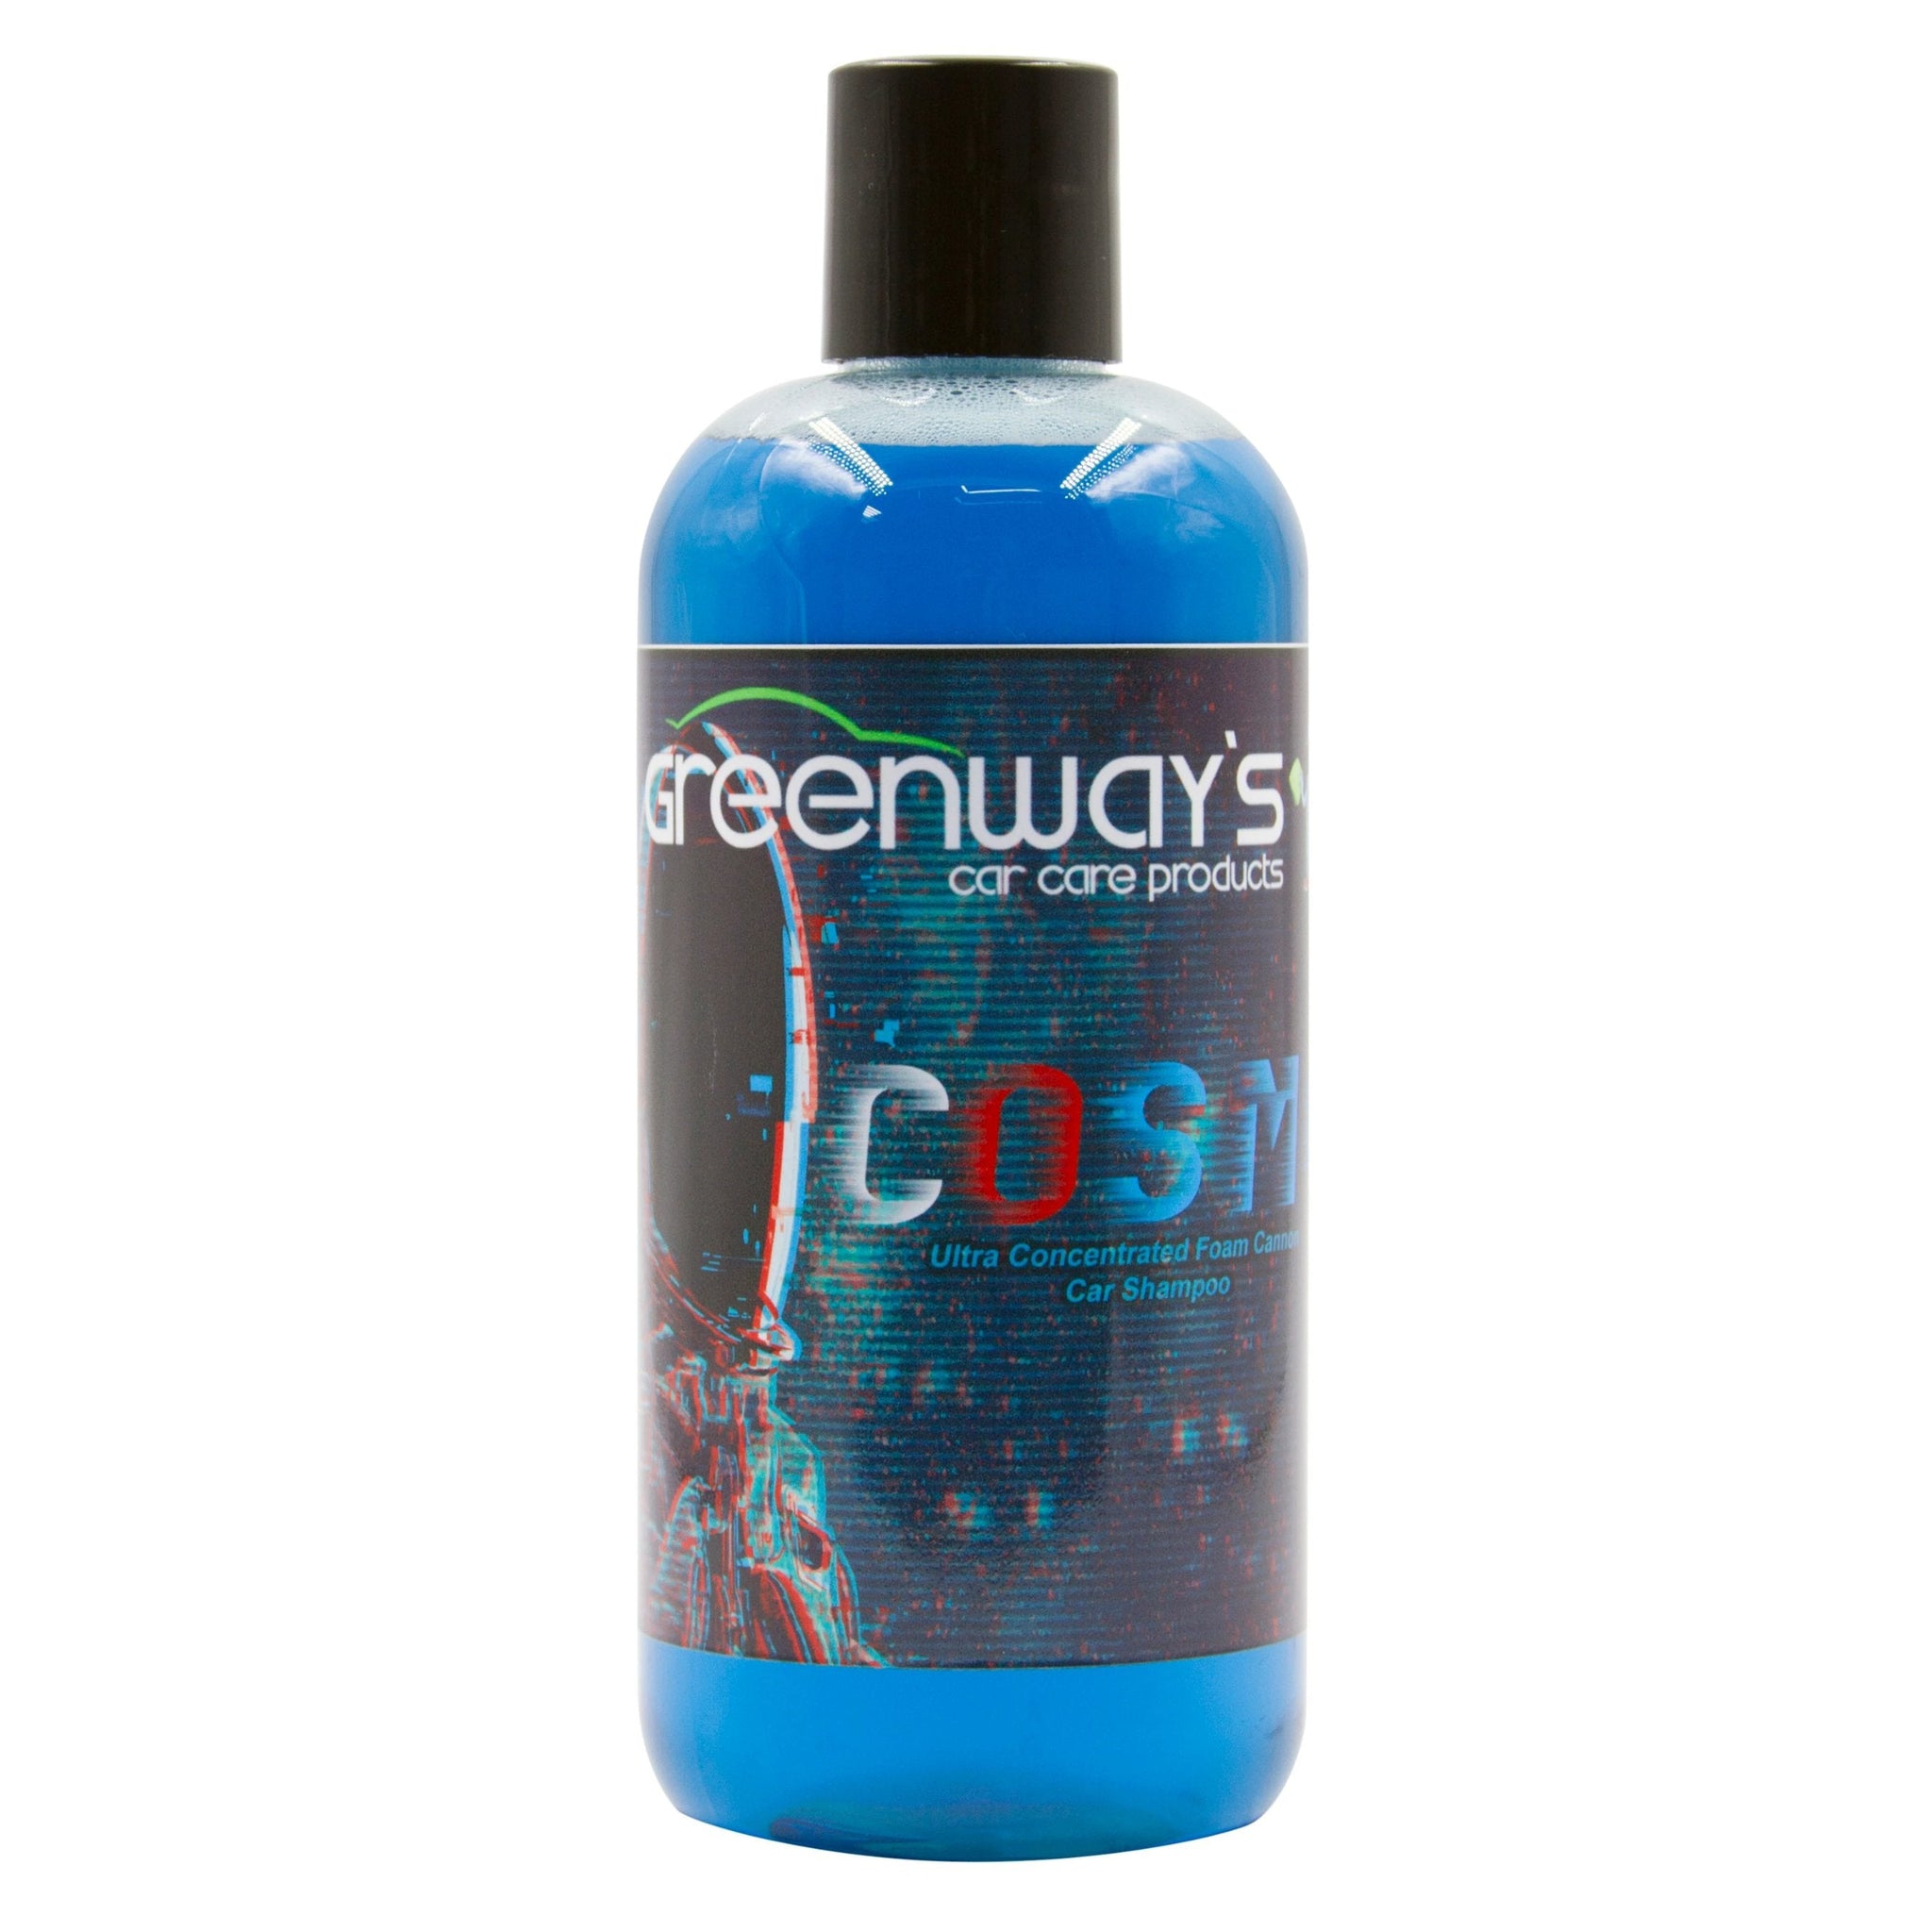 Greenway’s Car Care Products, Cosmo, ultra-concentrated, pH neutral, low or high-pressure foam cannon car shampoo, 16 ounces.